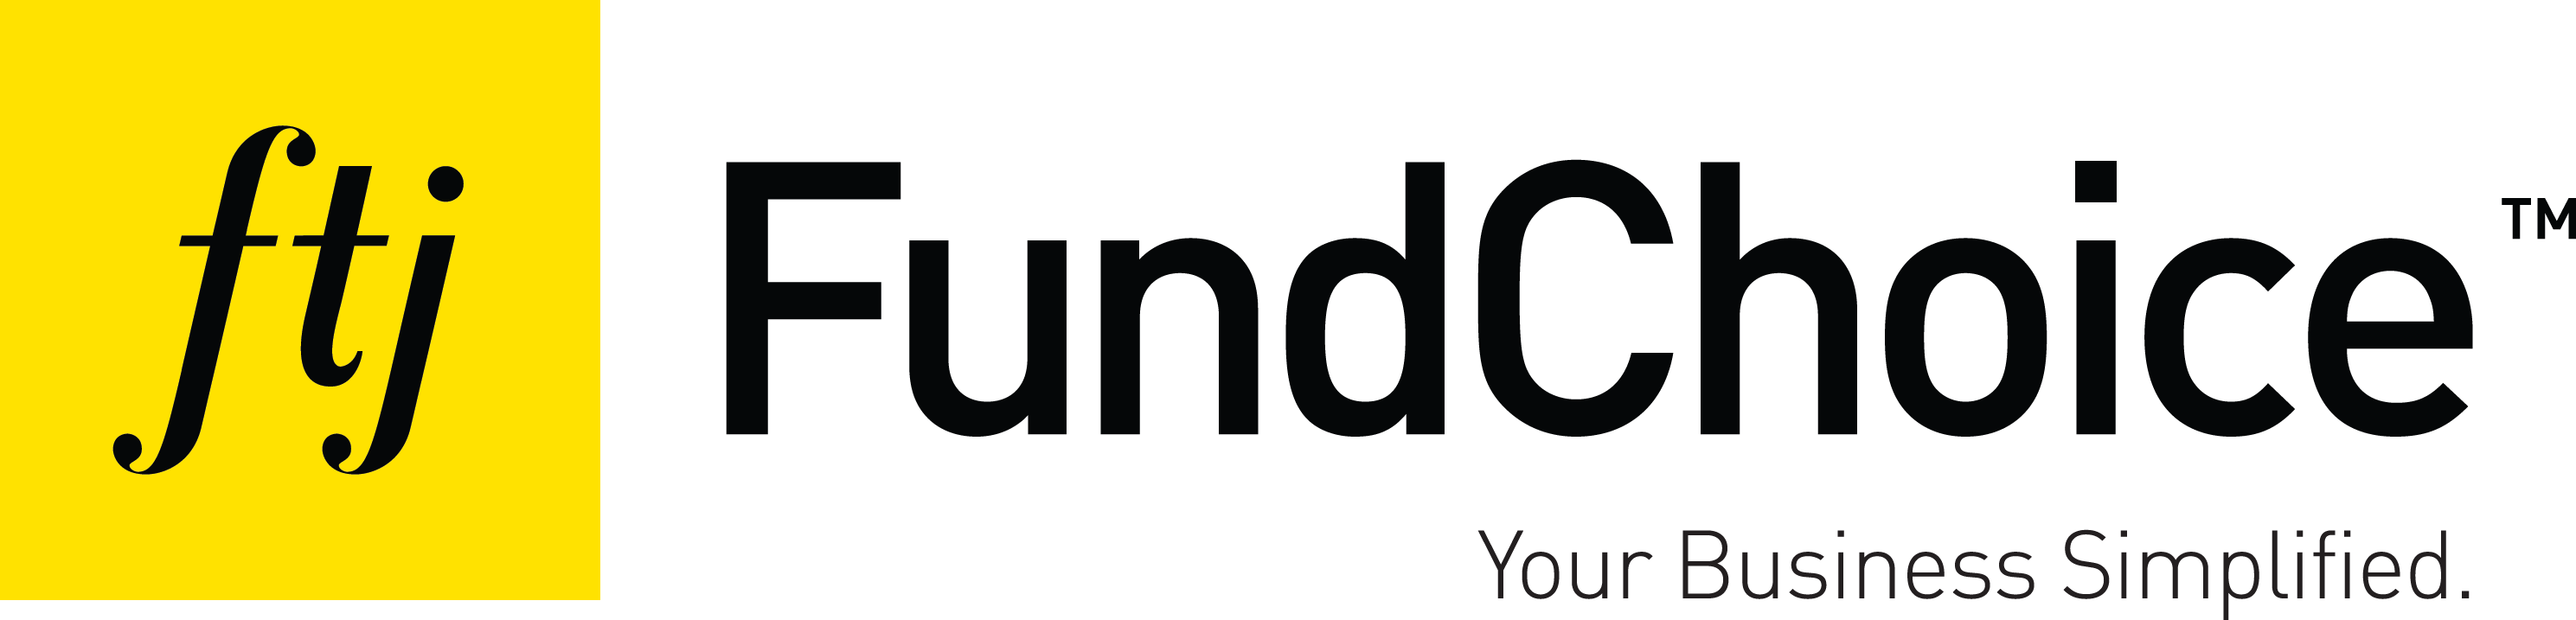 Founders Financial S